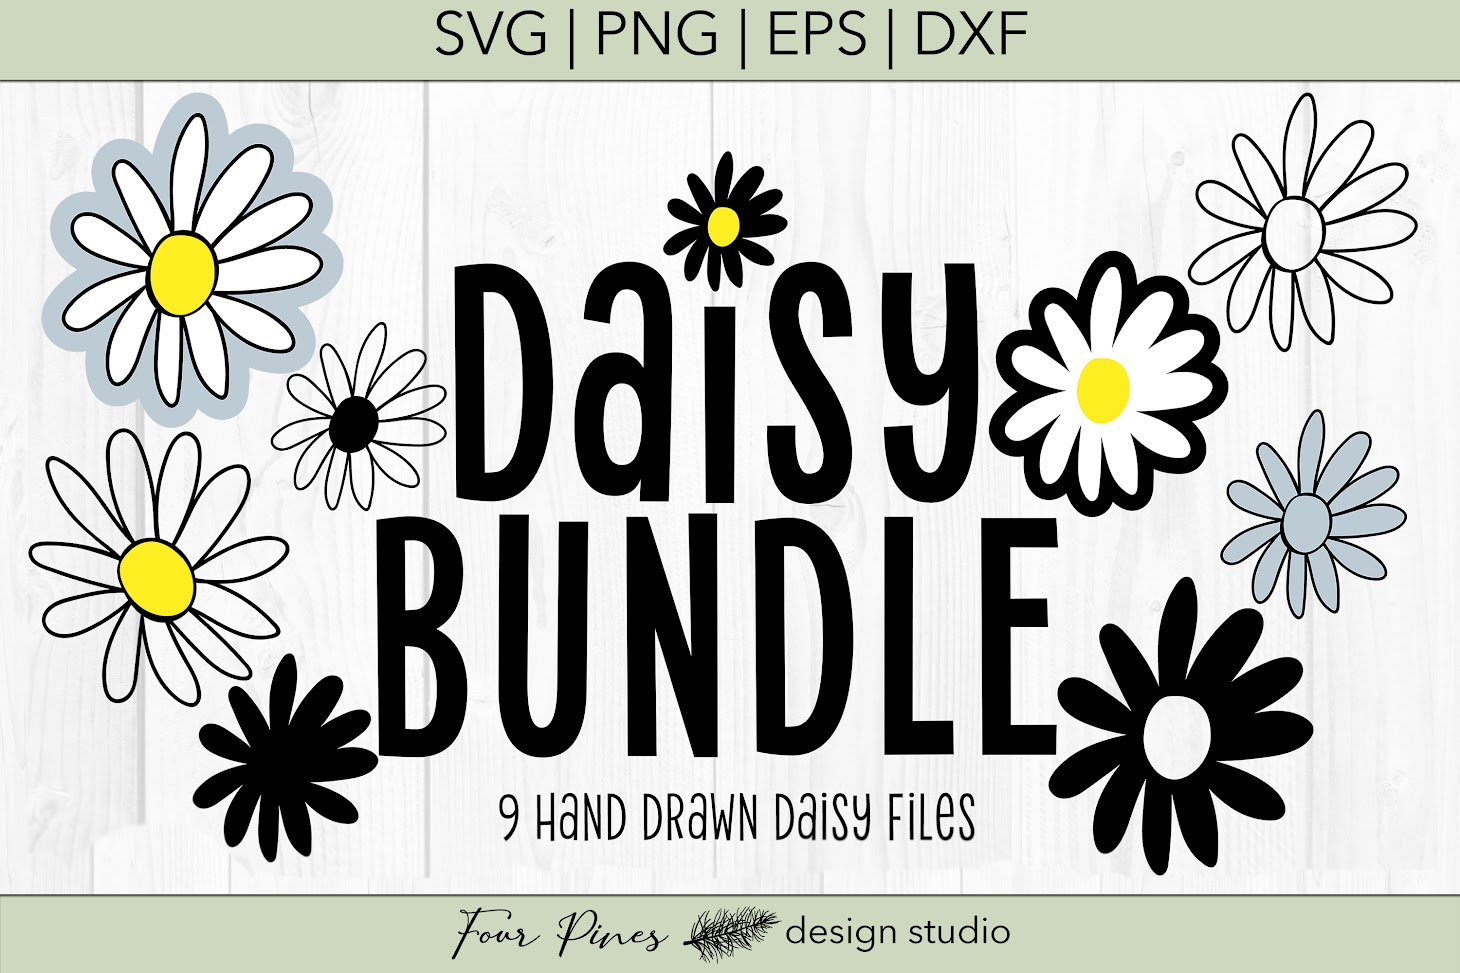 Download Free Daisy Handdrawn Bundle Svg Png Eps Dxf File